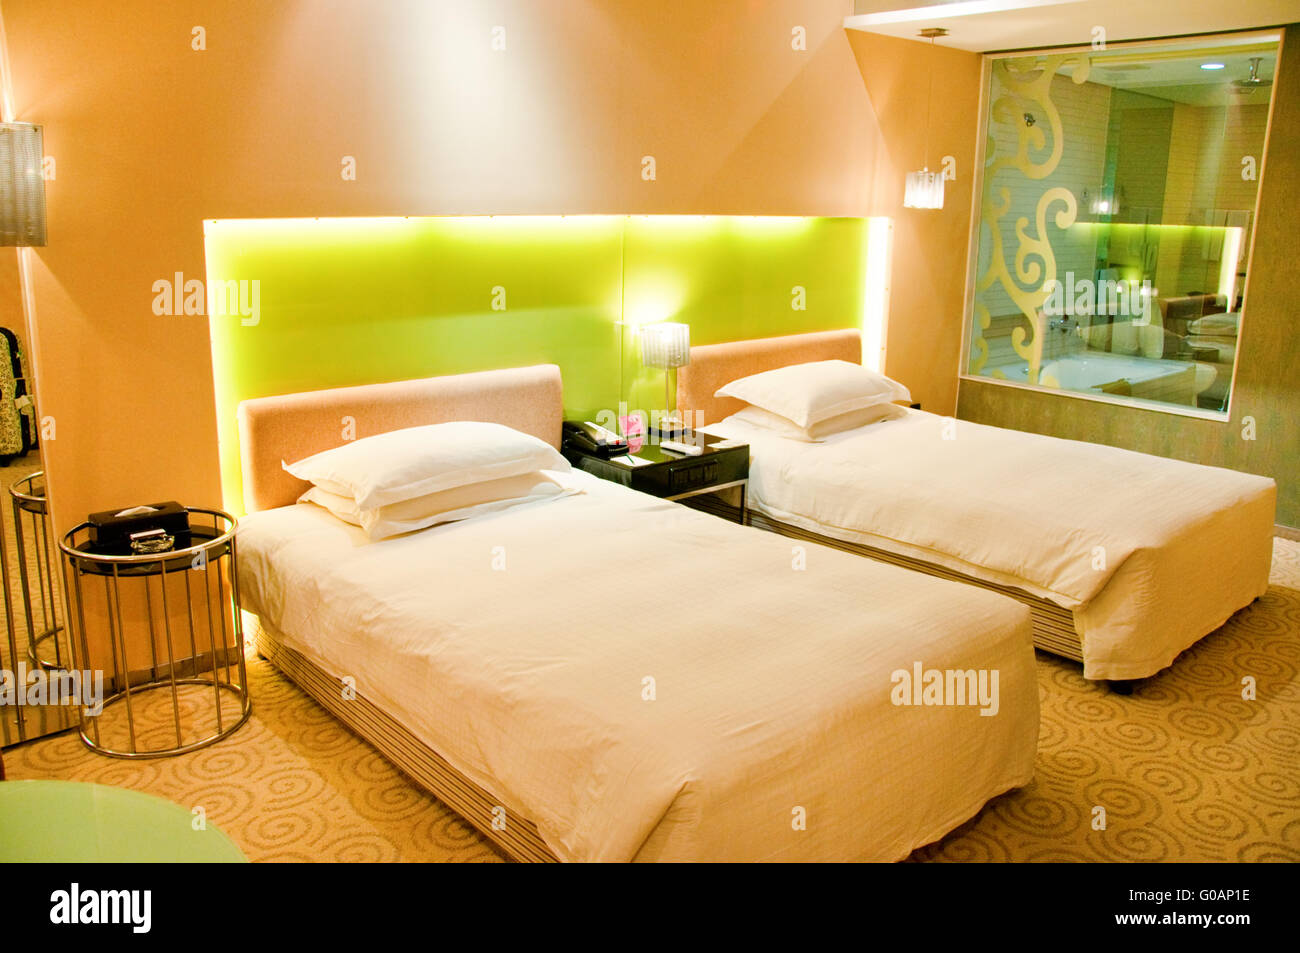 The view of luxury bed room (interior of house) Stock Photo